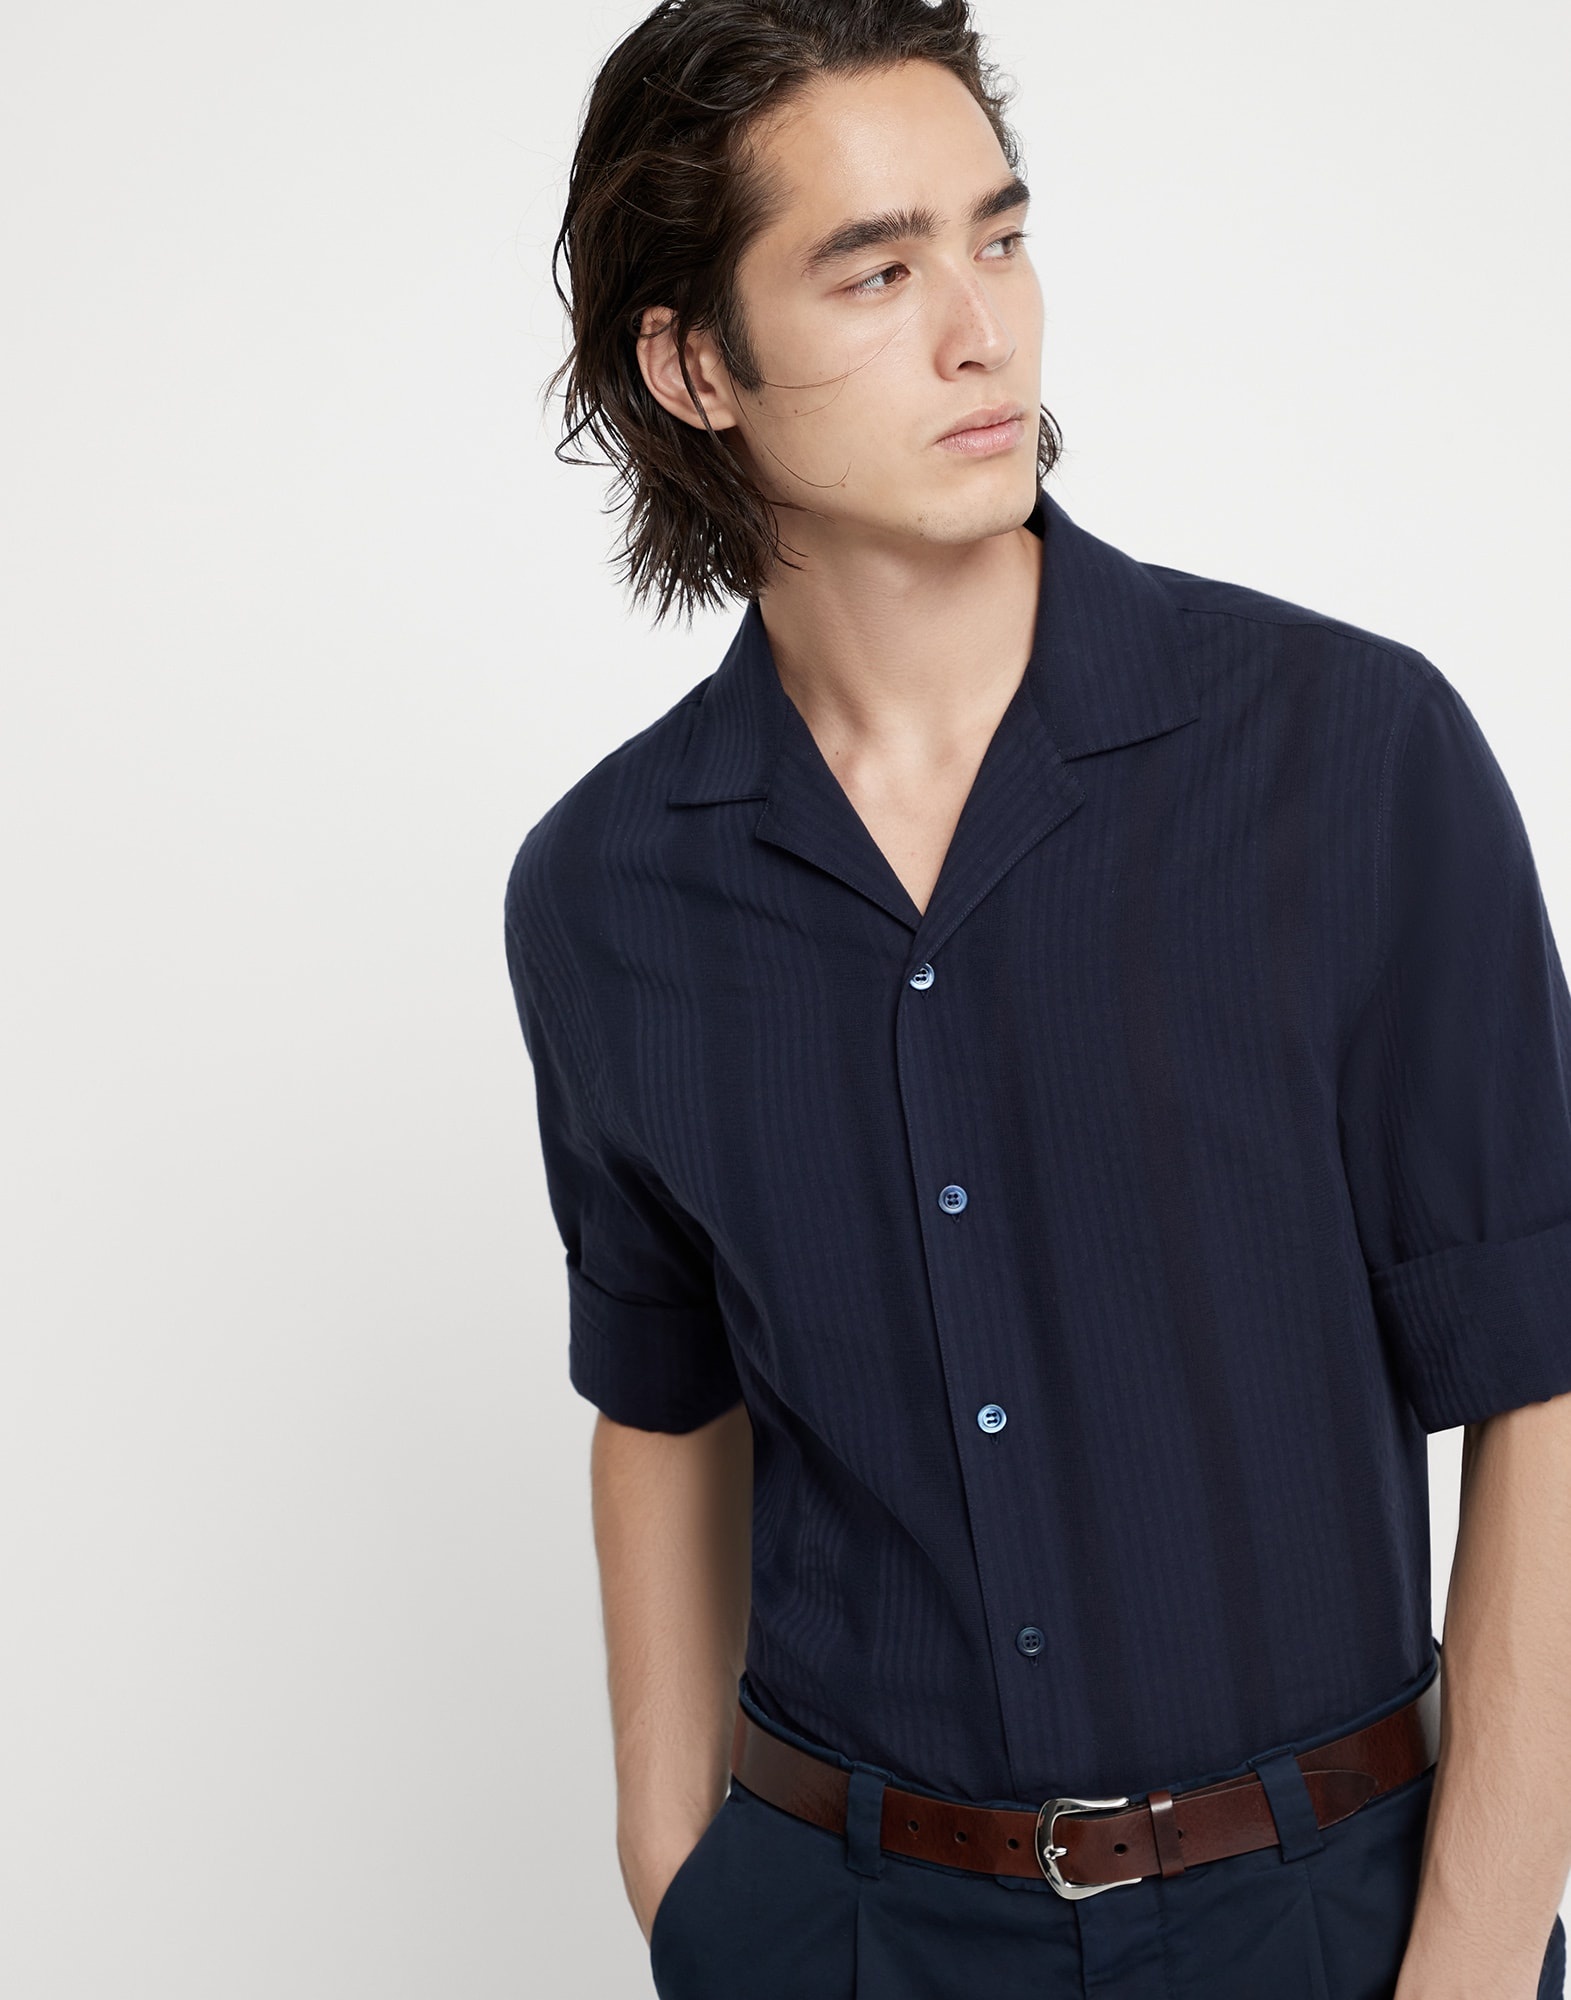 Textured stripe poplin easy fit shirt with camp collar - 4